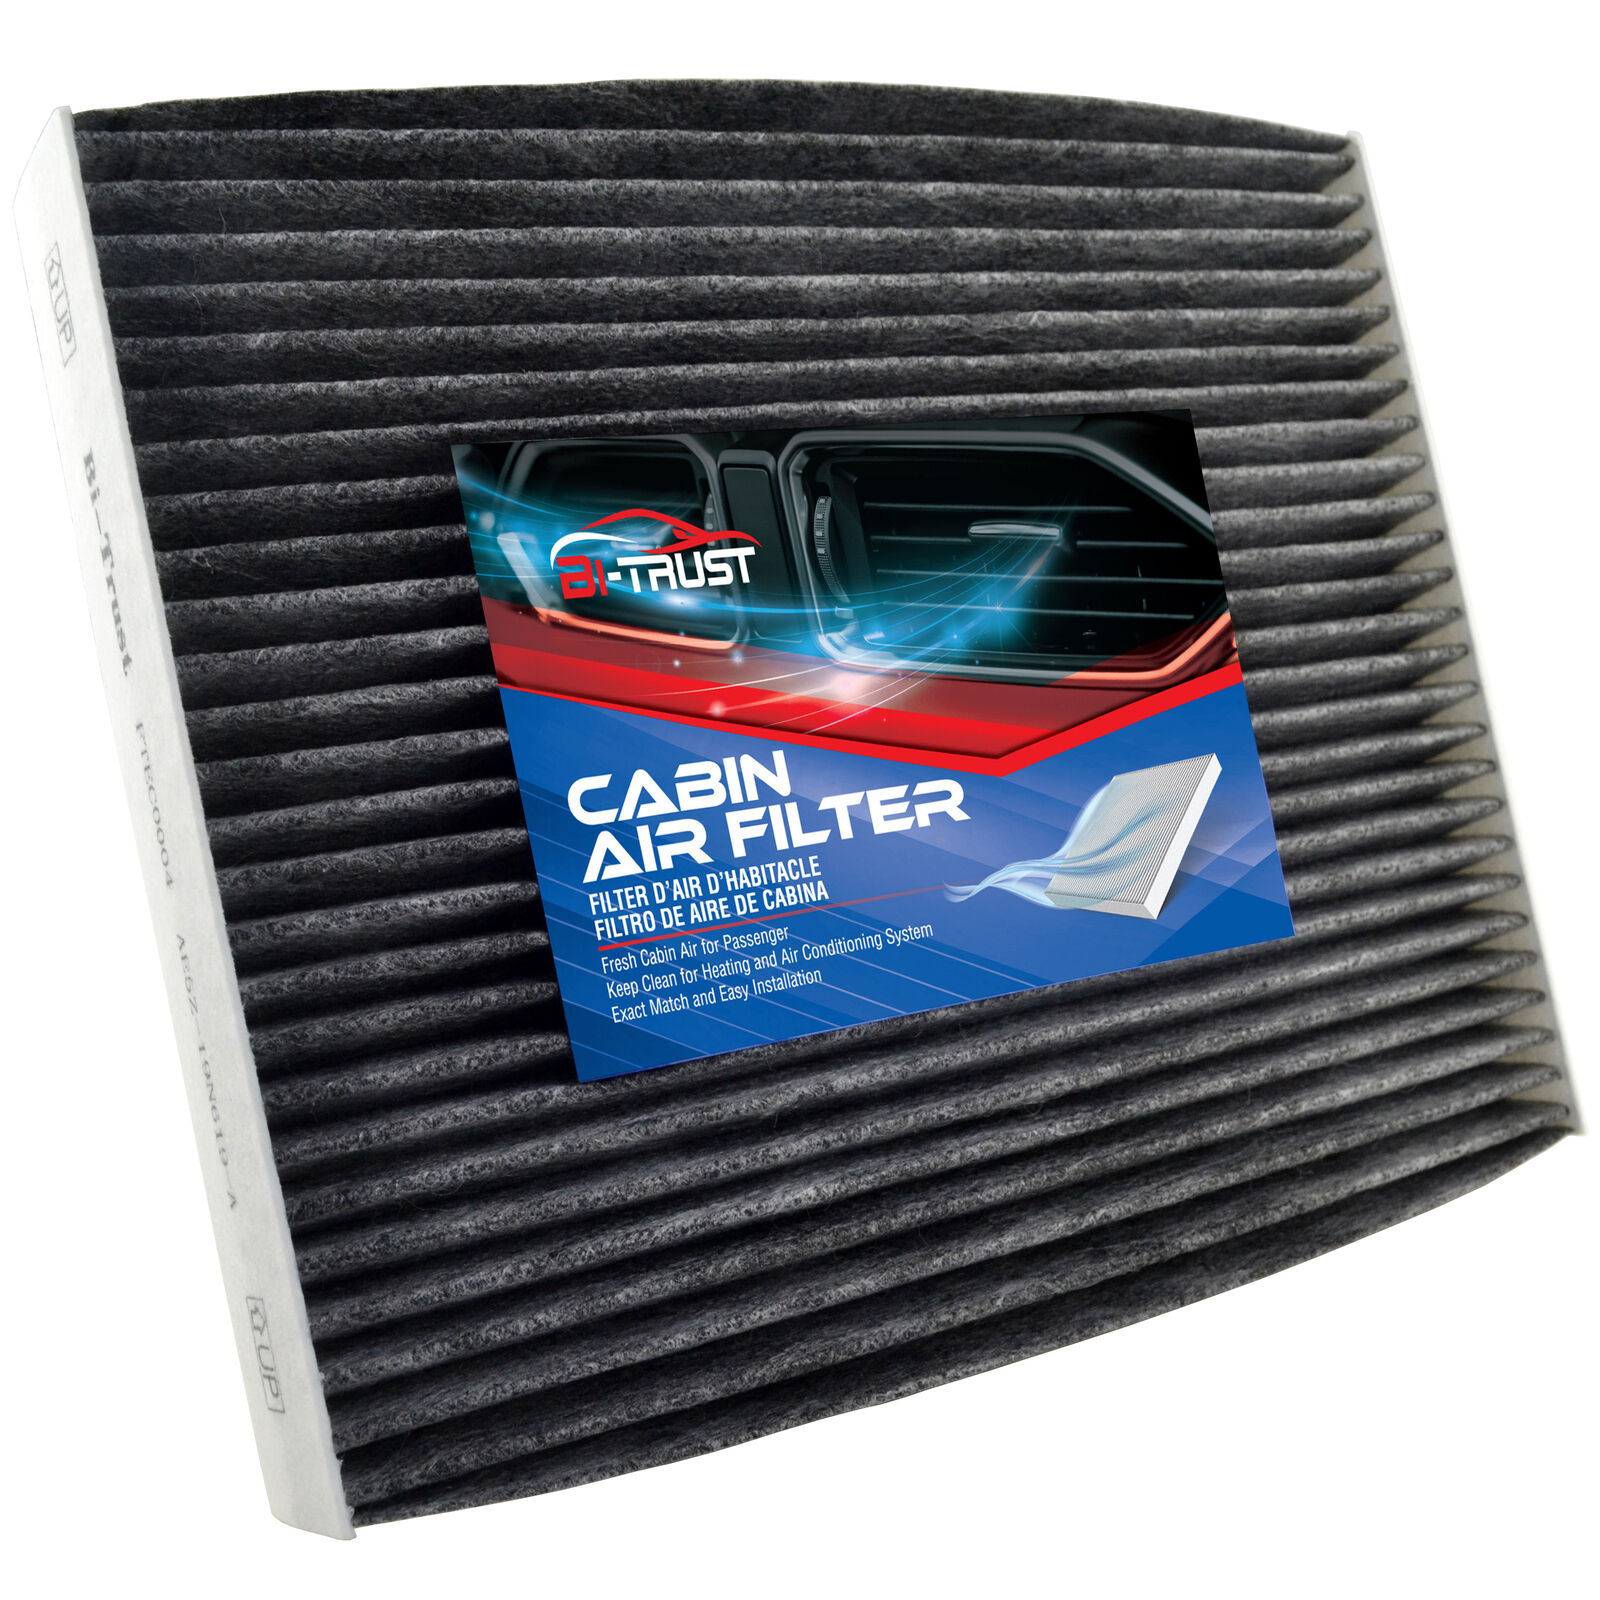 Cabin Air Filter for 2010-2012 Ford Fusion Lincoln MKZ 2010-2011 Mercury Milan